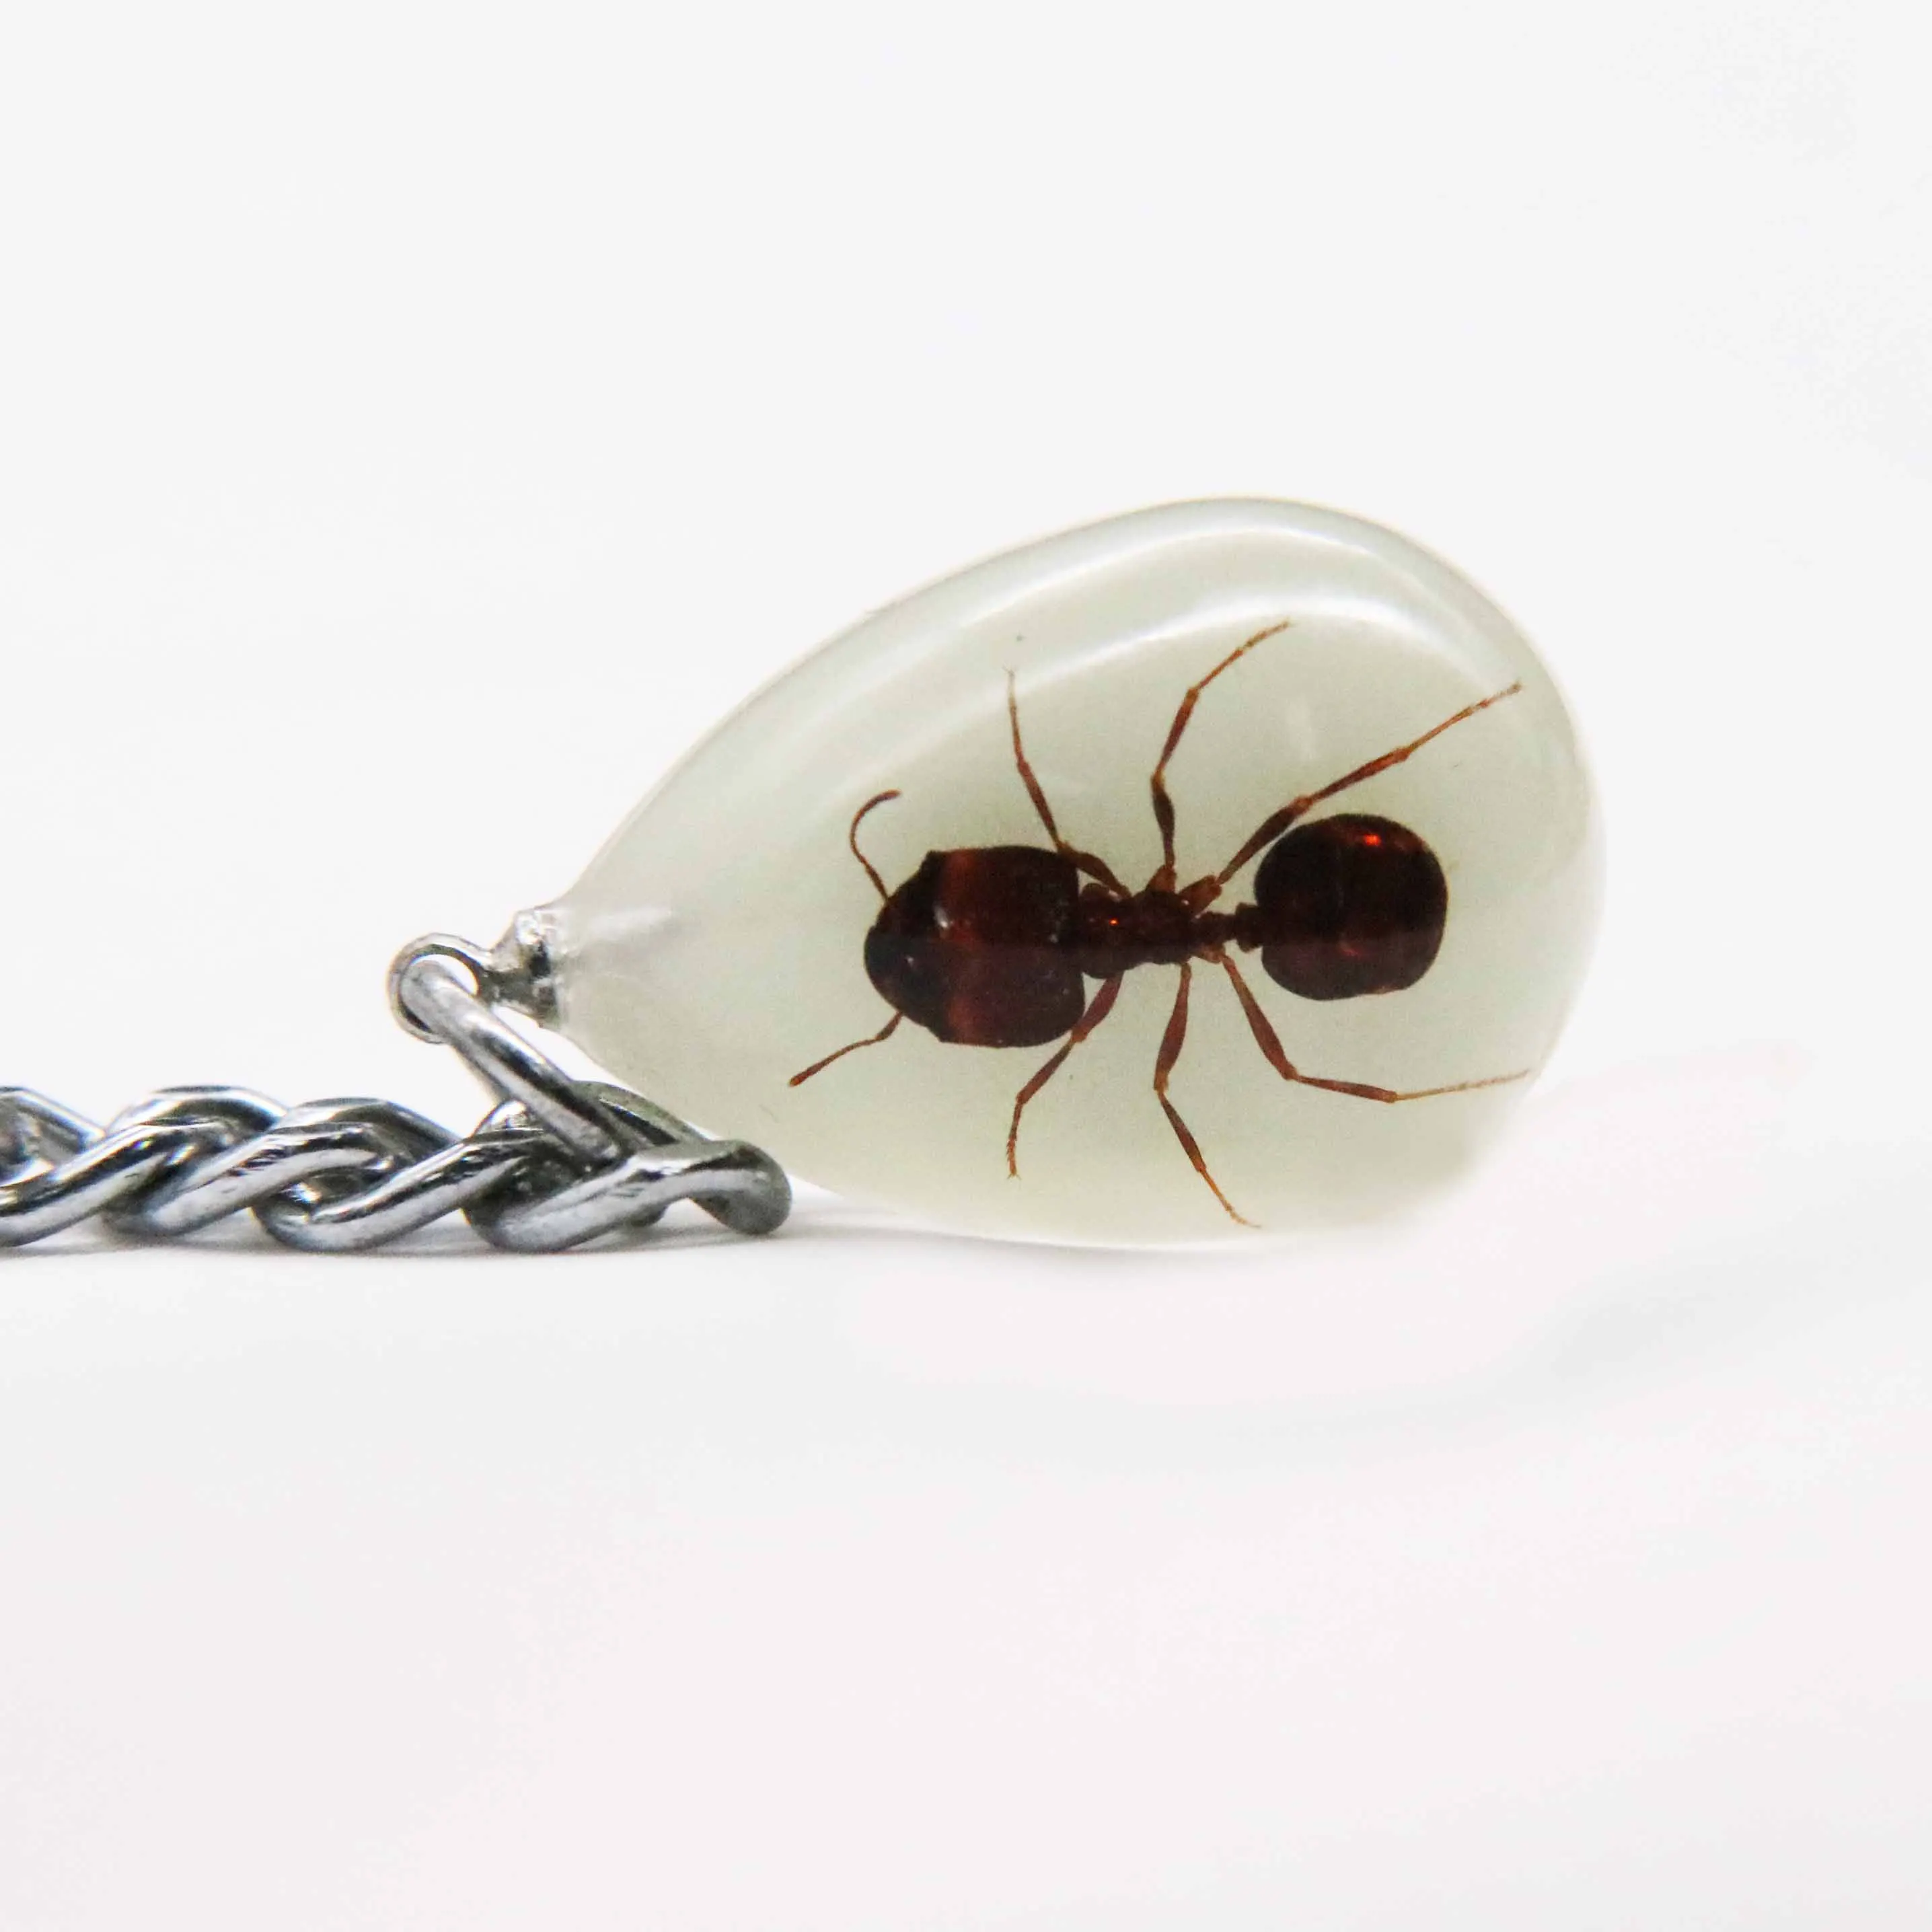 Real glow in the dark insect ant drop shape art jewelry key rings